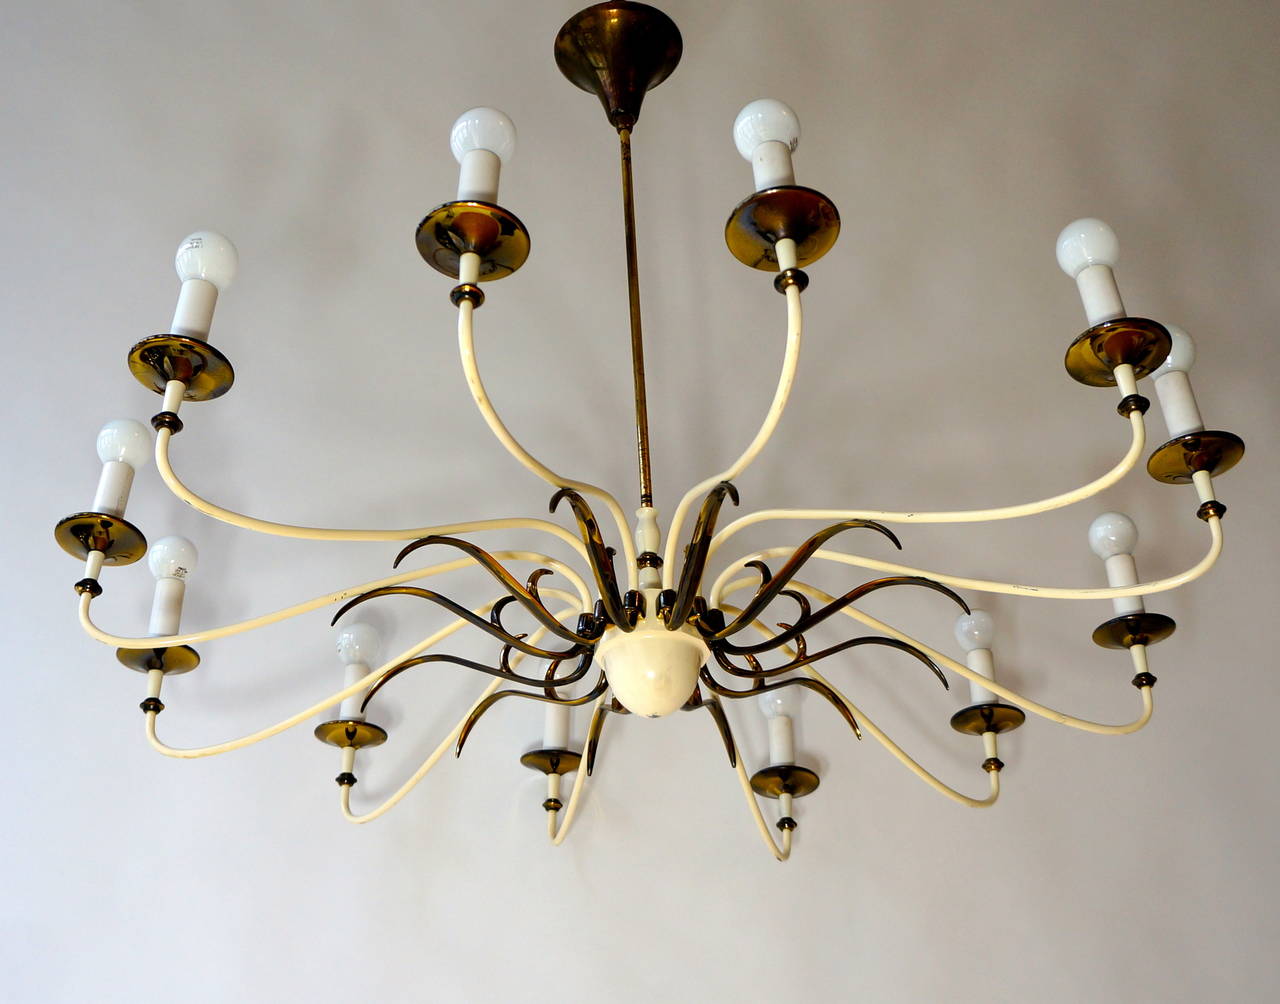 Large brass chandelier with 12 arms with E14 bulbs.
Measures: Diameter 95 cm.
Height 70 cm. 